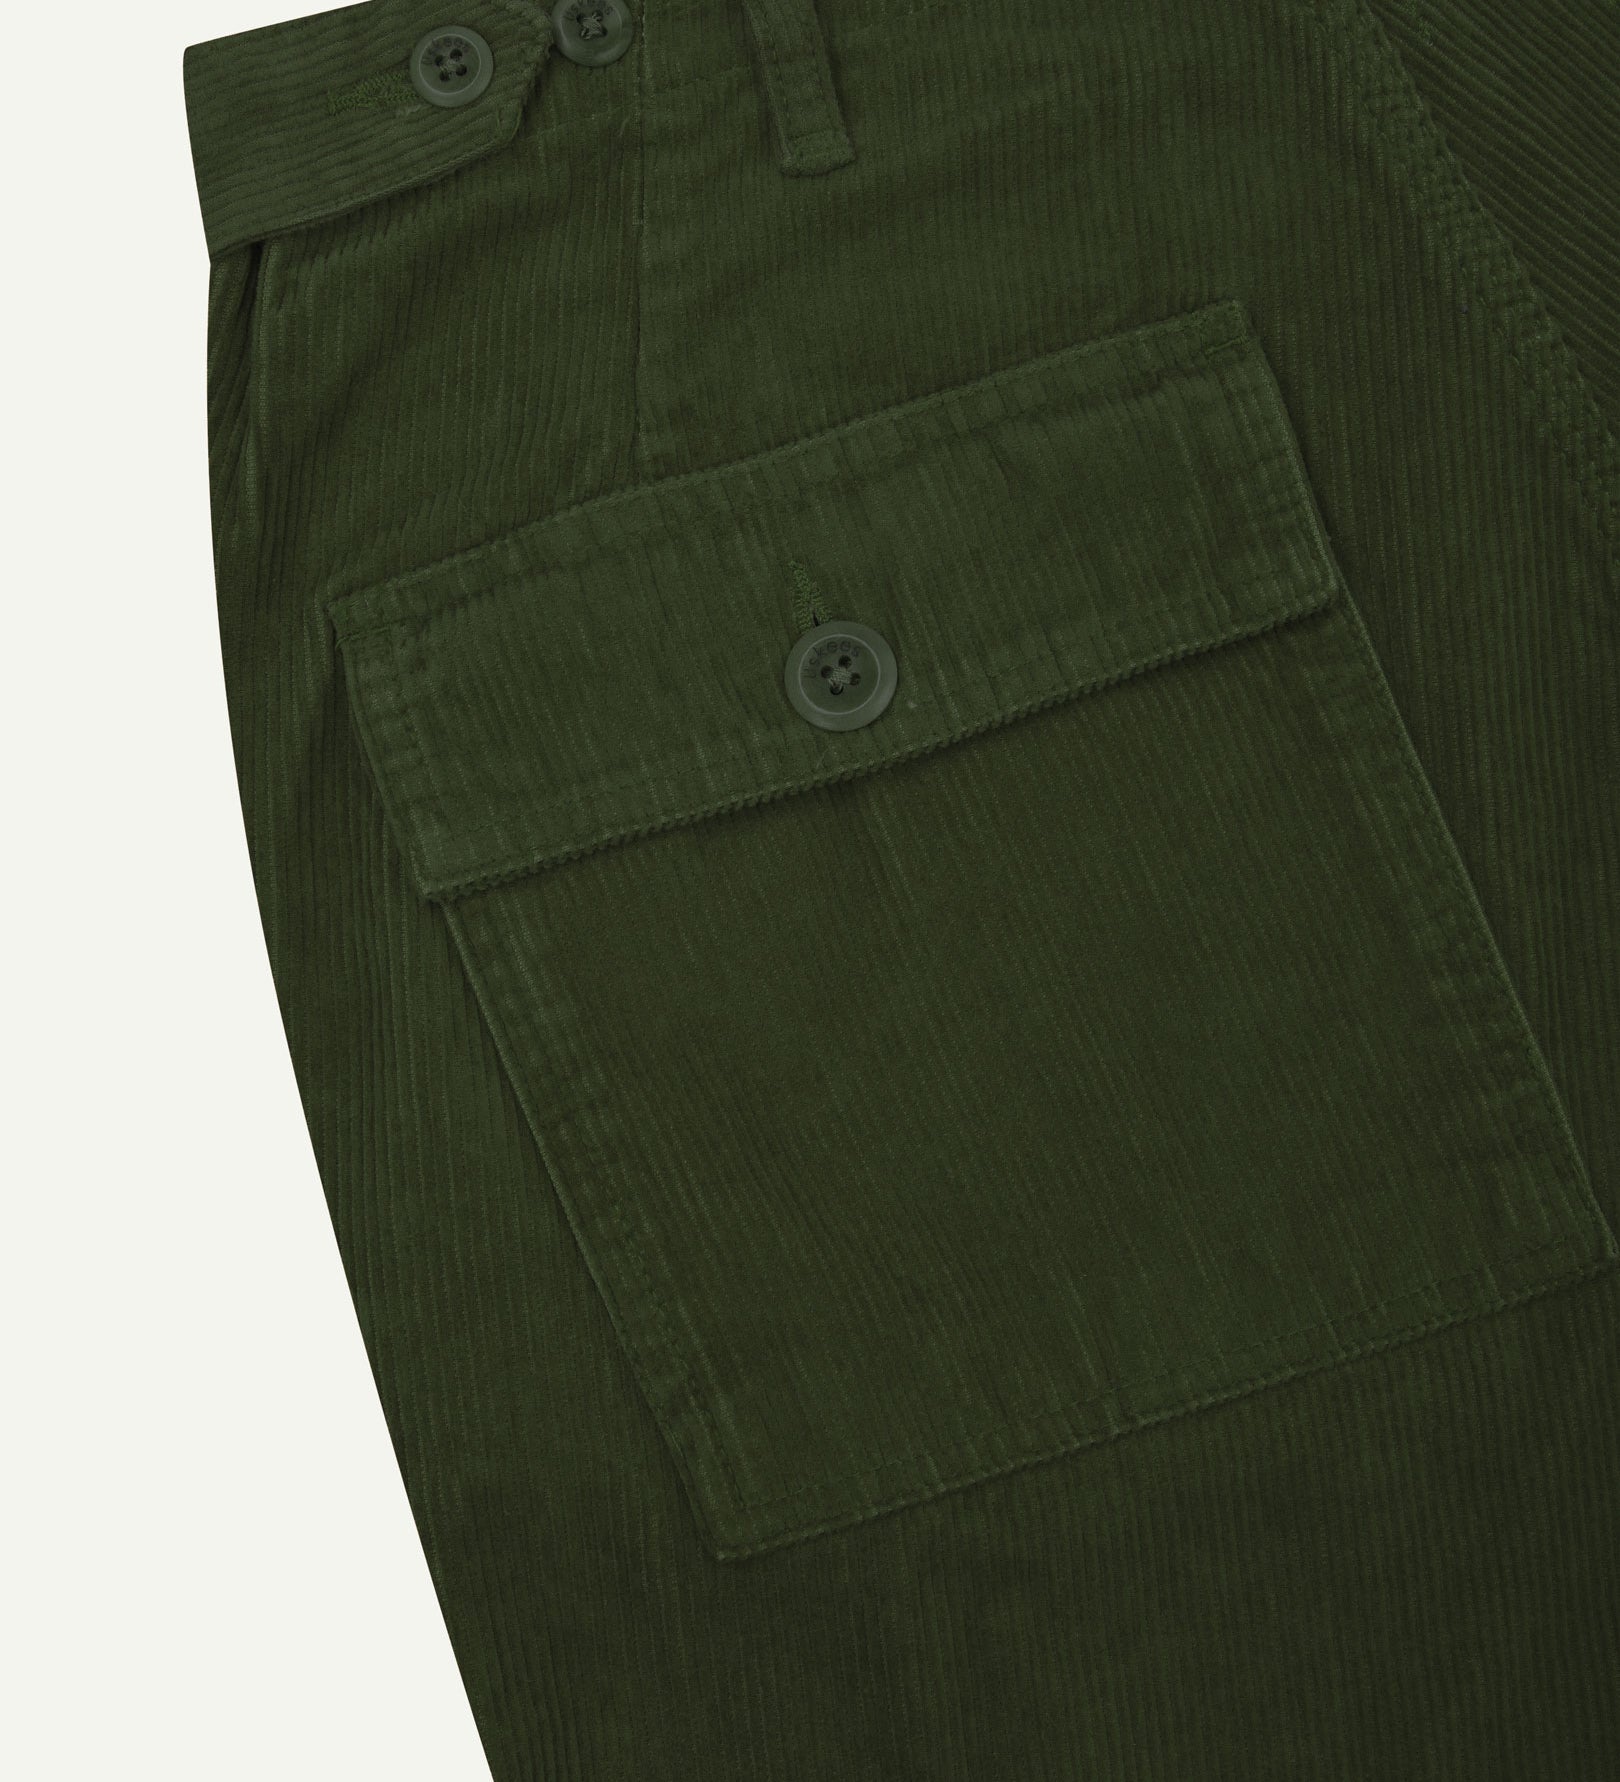 Close-up reverse view of Uskees coriander corduroy work pants with focus on left rear pocket, belt loops, triple stitching and adjustable button waist.